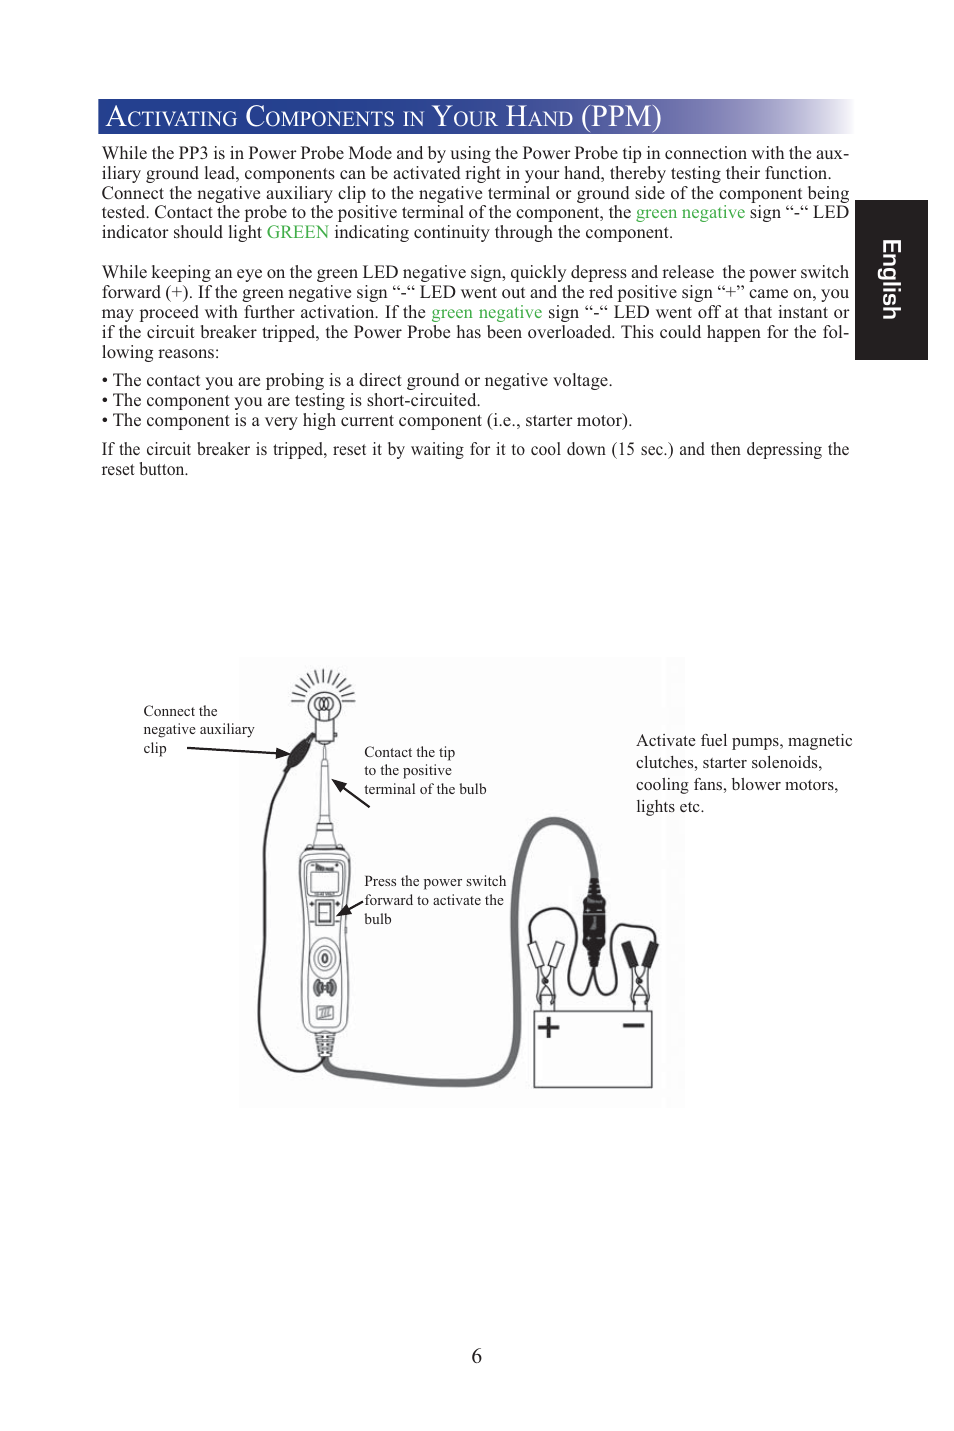 Pp3_7.eps, Ppm), English | Power Probe 3 User Manual | Page 7 / 15